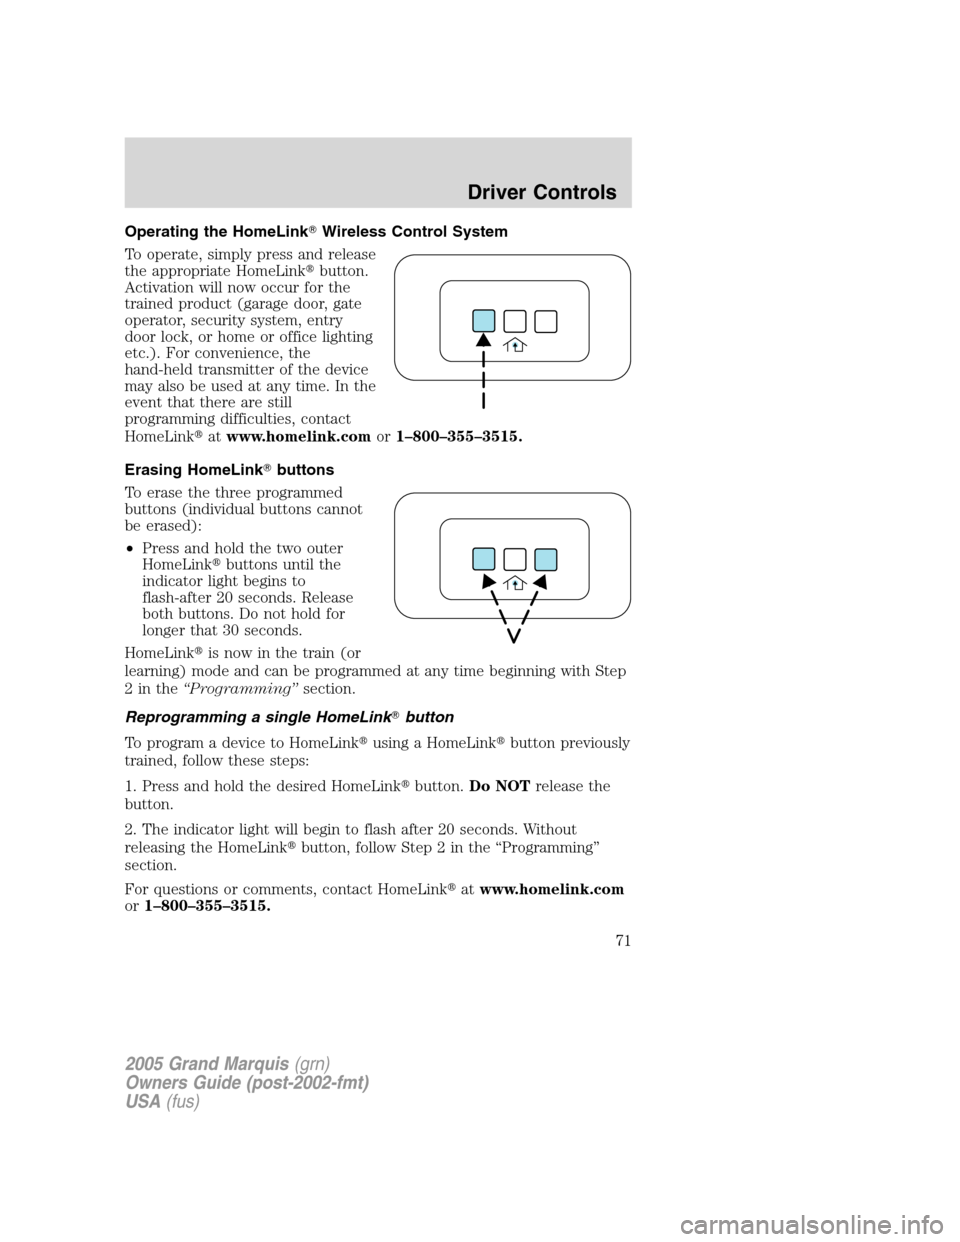 Mercury Grand Marquis 2005  s Manual PDF Operating the HomeLinkWireless Control System
To operate, simply press and release
the appropriate HomeLinkbutton.
Activation will now occur for the
trained product (garage door, gate
operator, secu